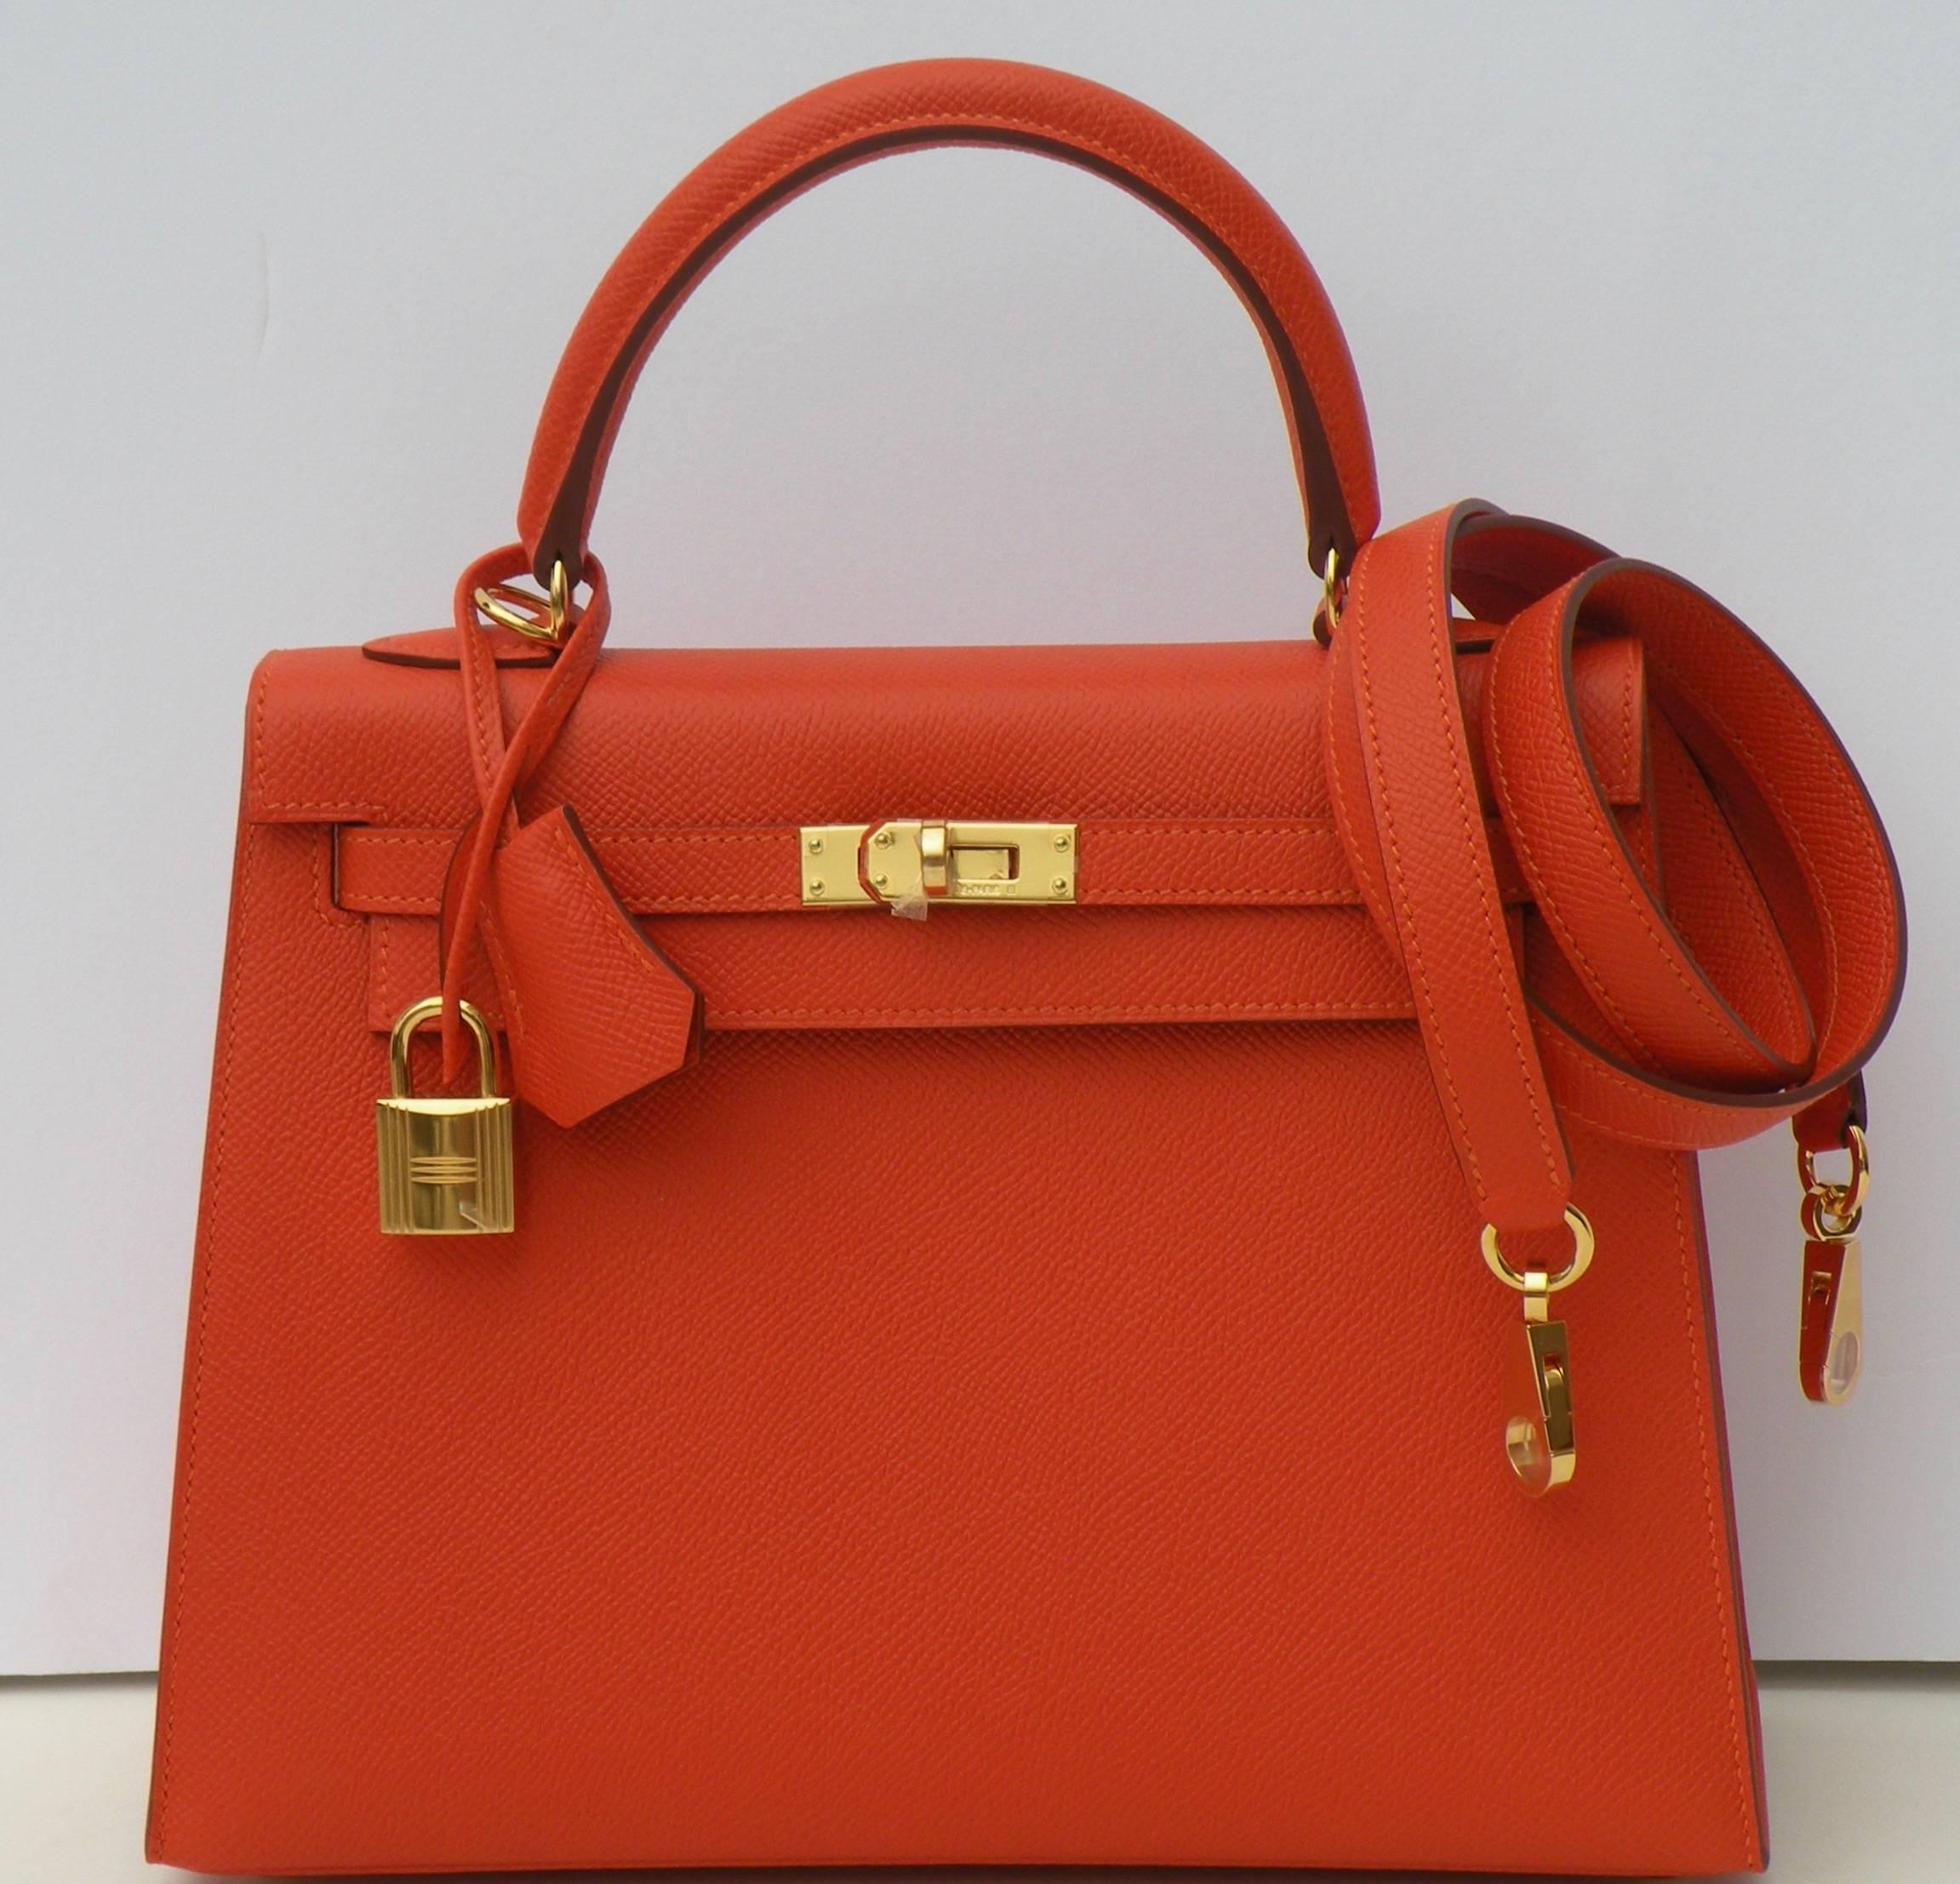 Hermès
25cm Kelly
How can you go wrong with this one!
Small Kelly in RARE size 25
Everyone wants a small Kelly these Days
Sellier Rigid
Orange Feu
Shoulder strap for easy hands free shopping
Leather: Epsom
Hardware: Gold

Lined in Chevre

Stamp: X

